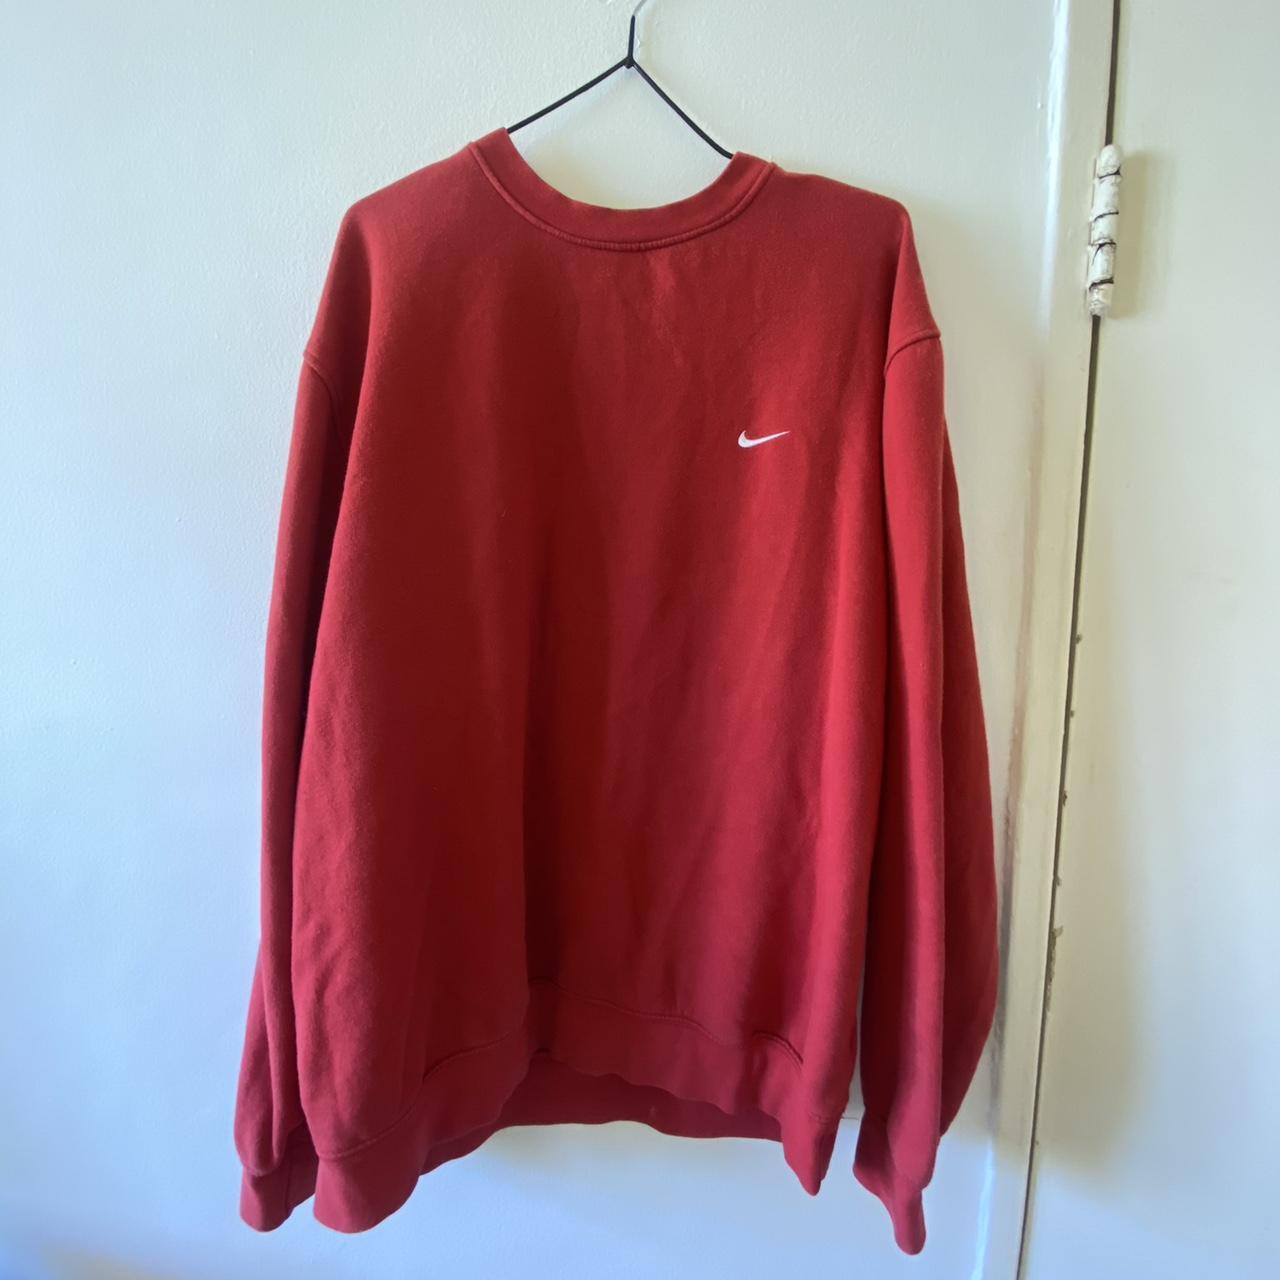 Red vintage Nike jumper in good condition with no... - Depop